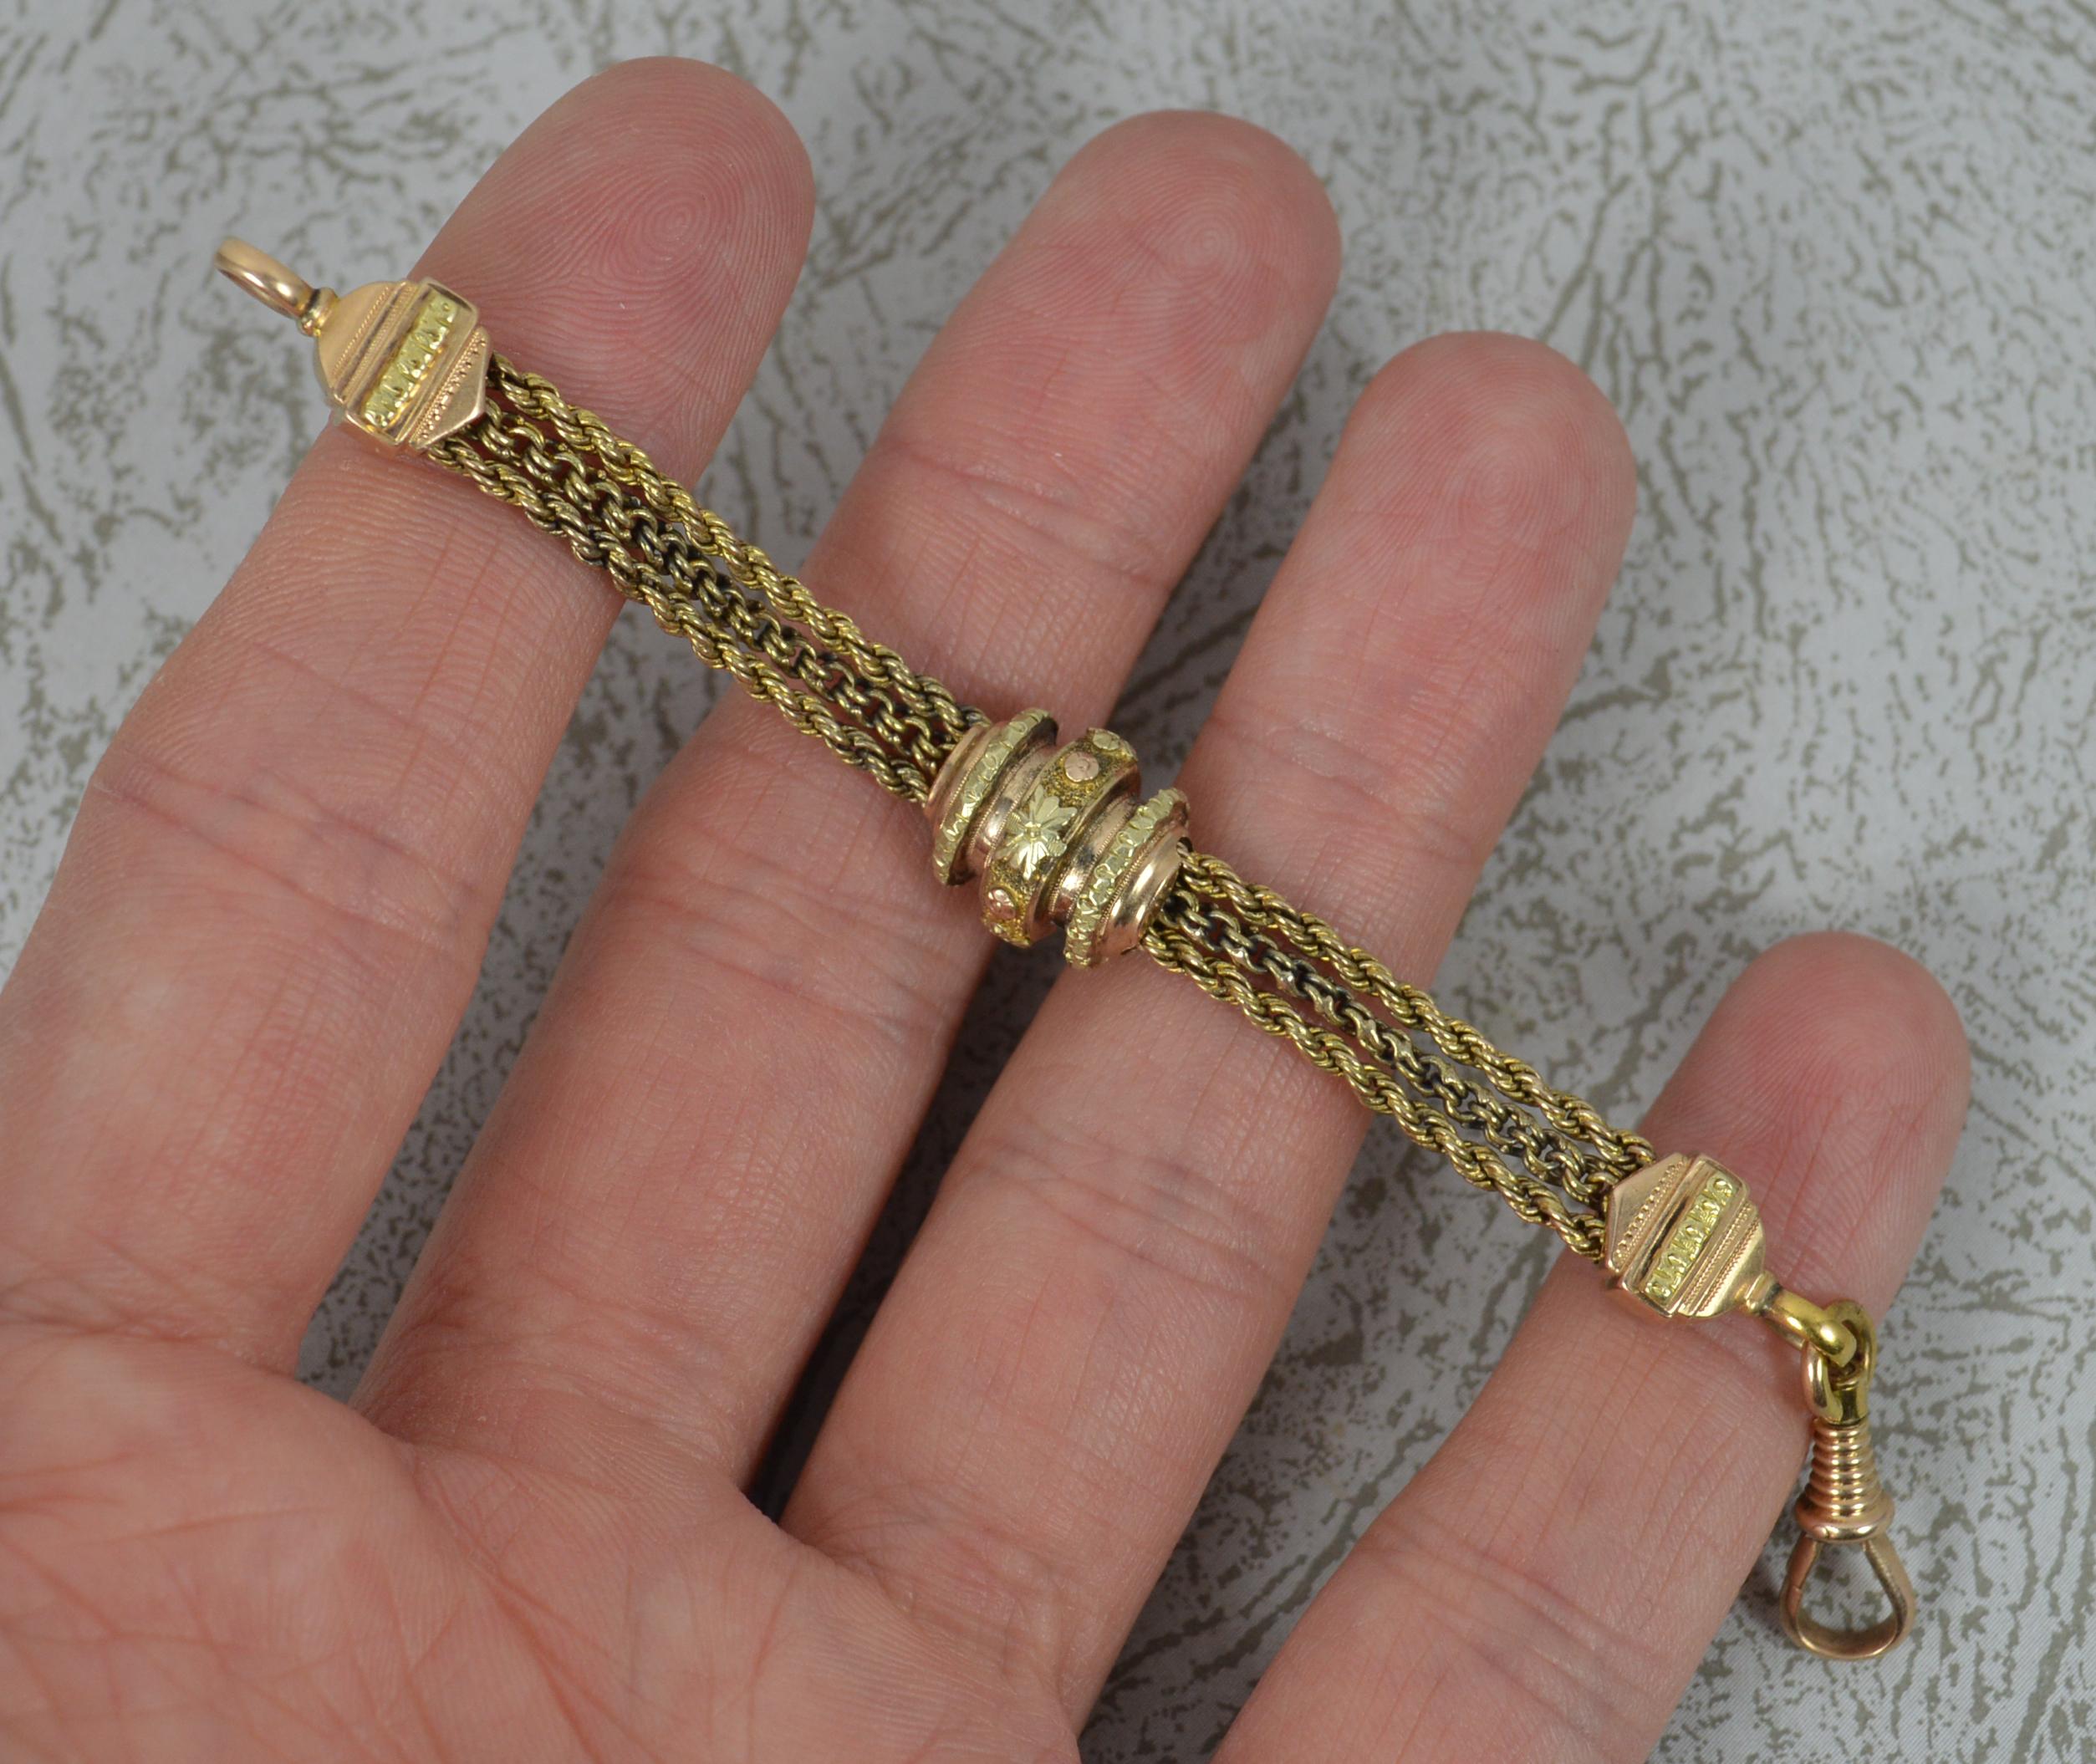 A stunning early to mid Victorian period chain.
Solid 15 carat gold example. Two tone example, rose gold piece with yellow gold highlights. 
Fancy link design throughout.

CONDITION ; Very good for age. Crisp design and strong links. Clean piece.